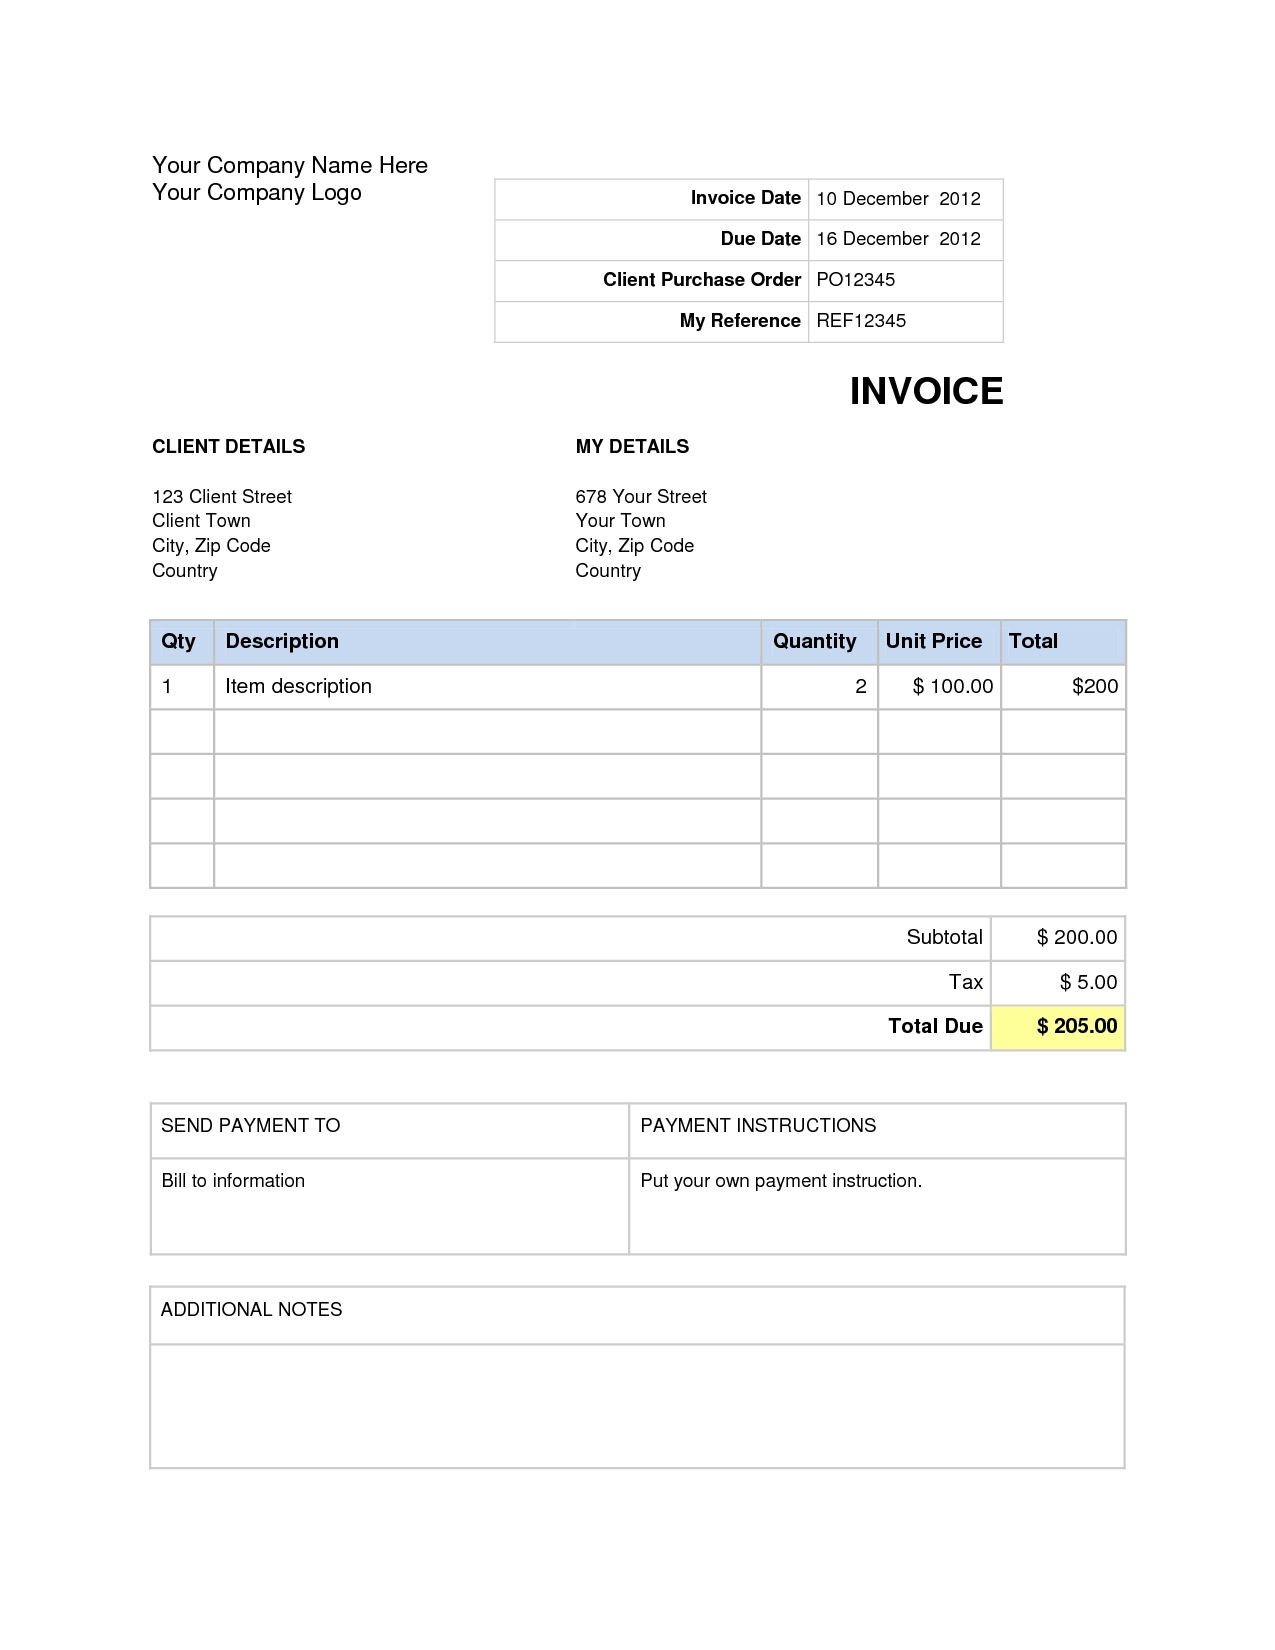 invoices in word blank invoice template to print invoice templat fill in and print 1275 X 1650